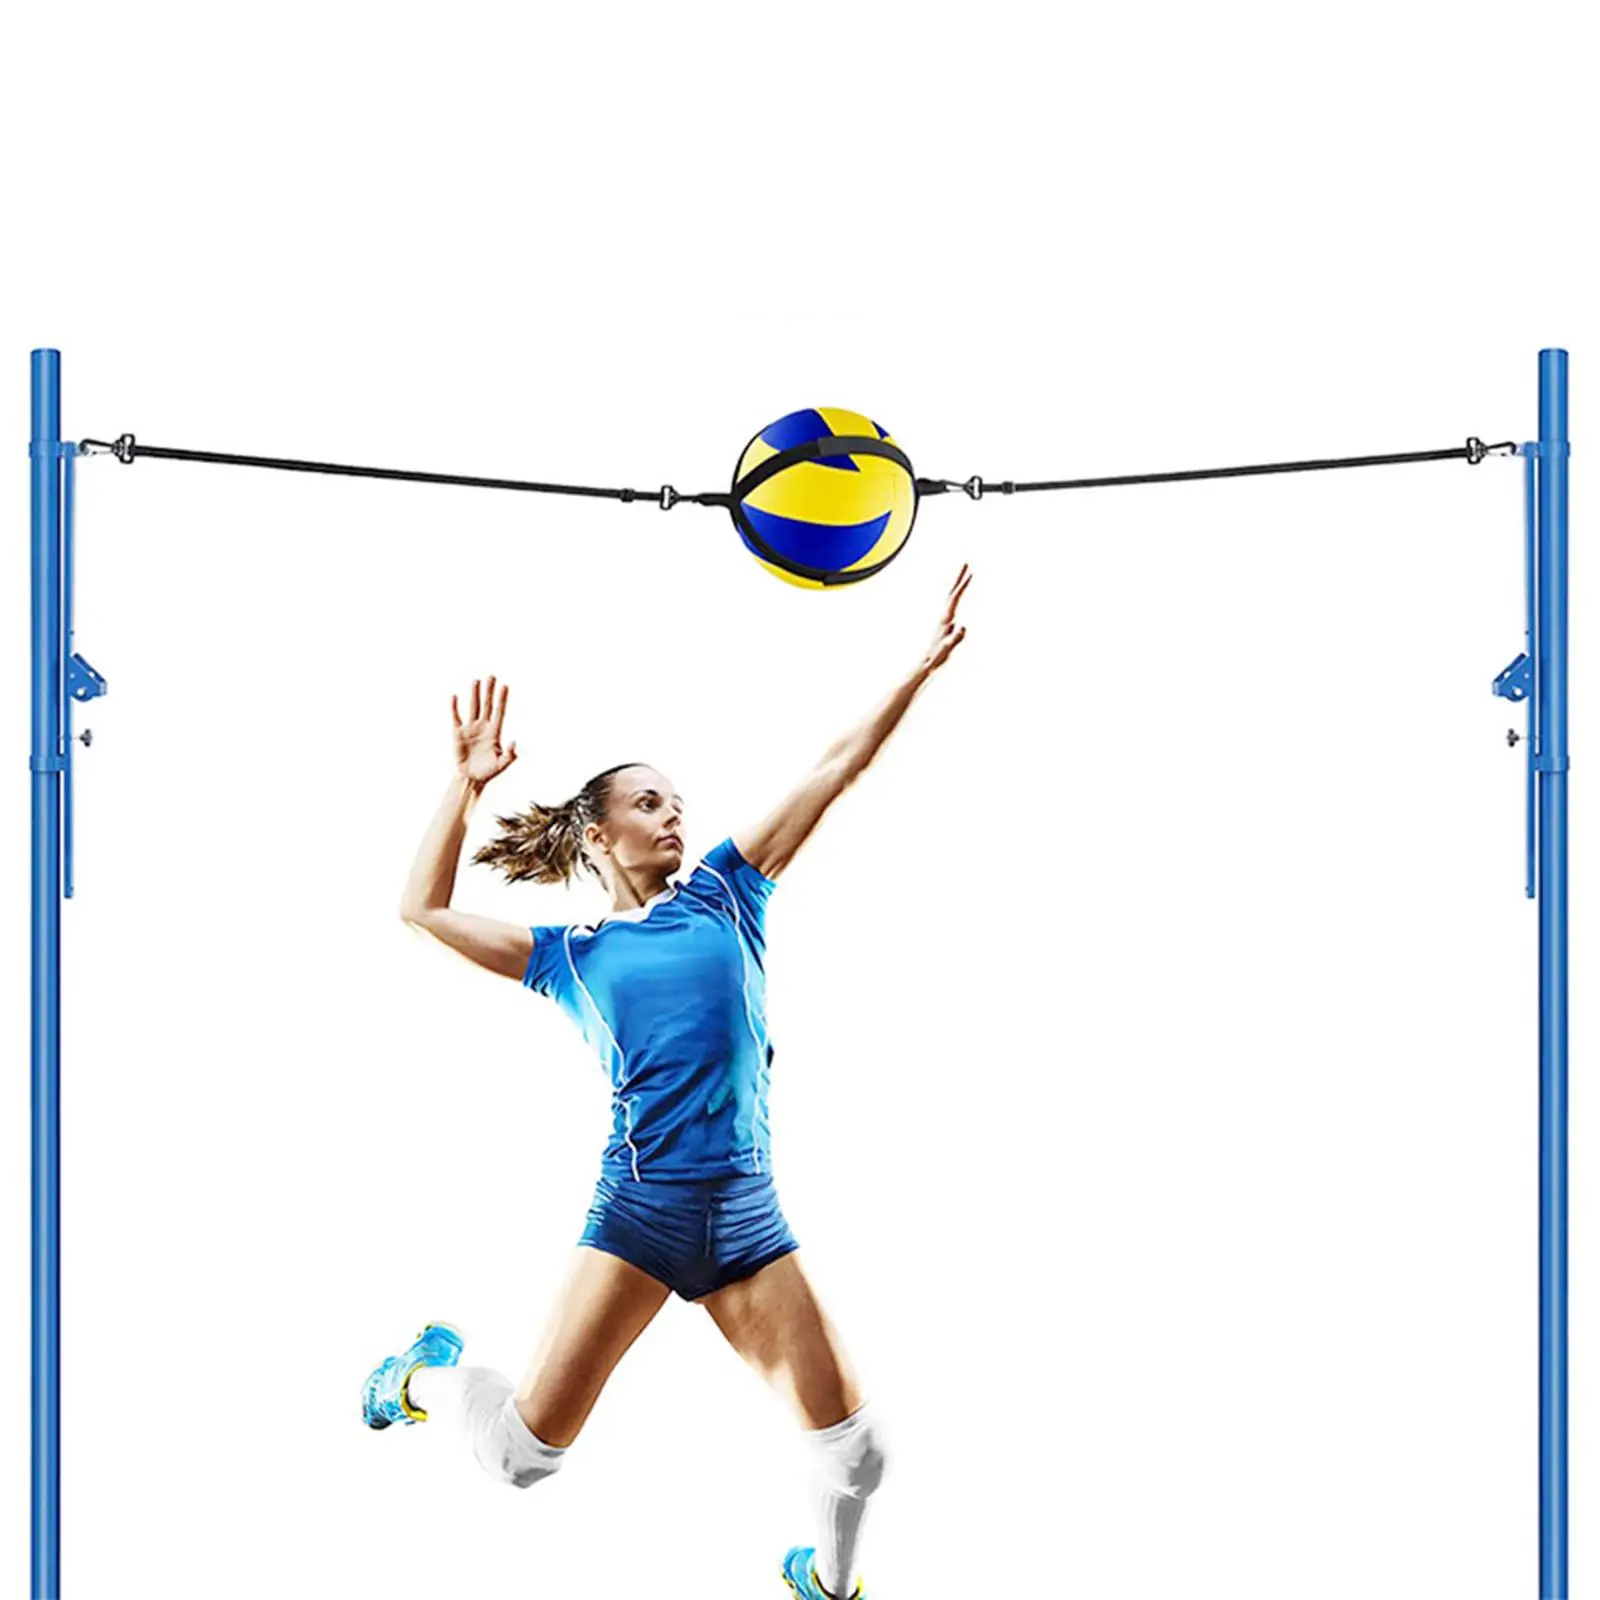 Volleyball Training Equipment, Solo Practice Trainer, Adjustable Gifts for